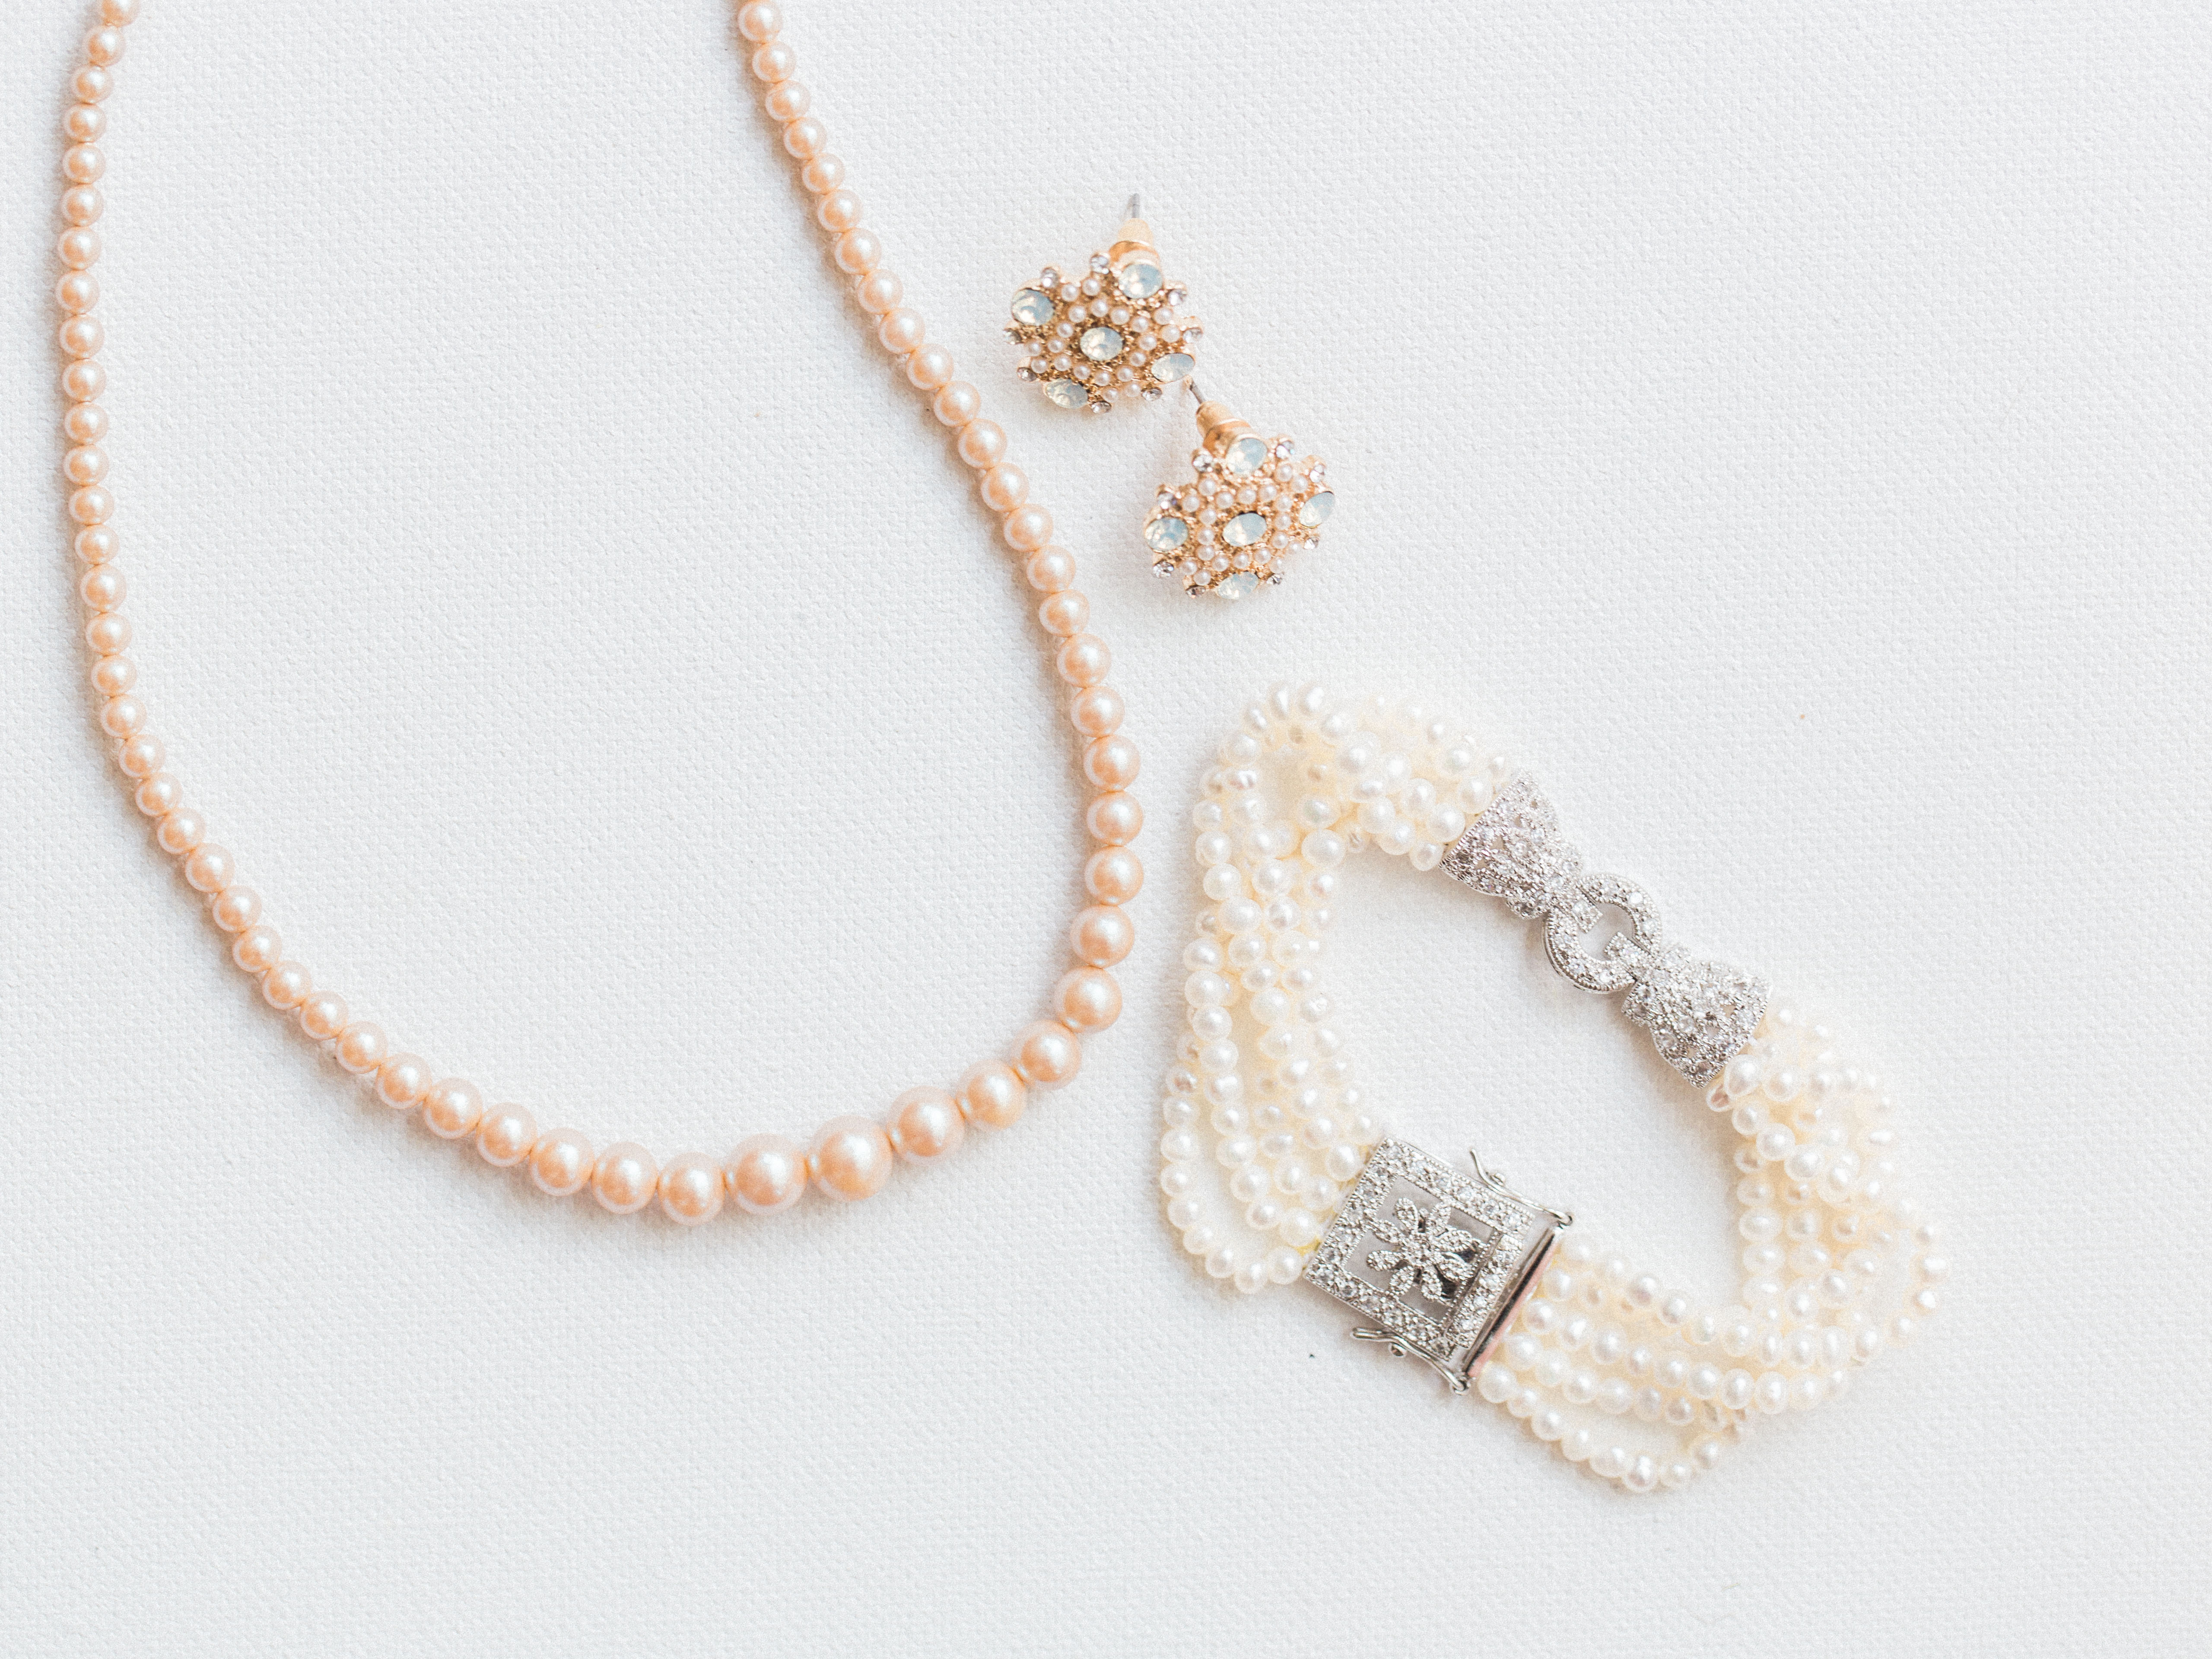 Pearl Wedding Jewelry | The Day's Design | Samantha James Photogrpahy